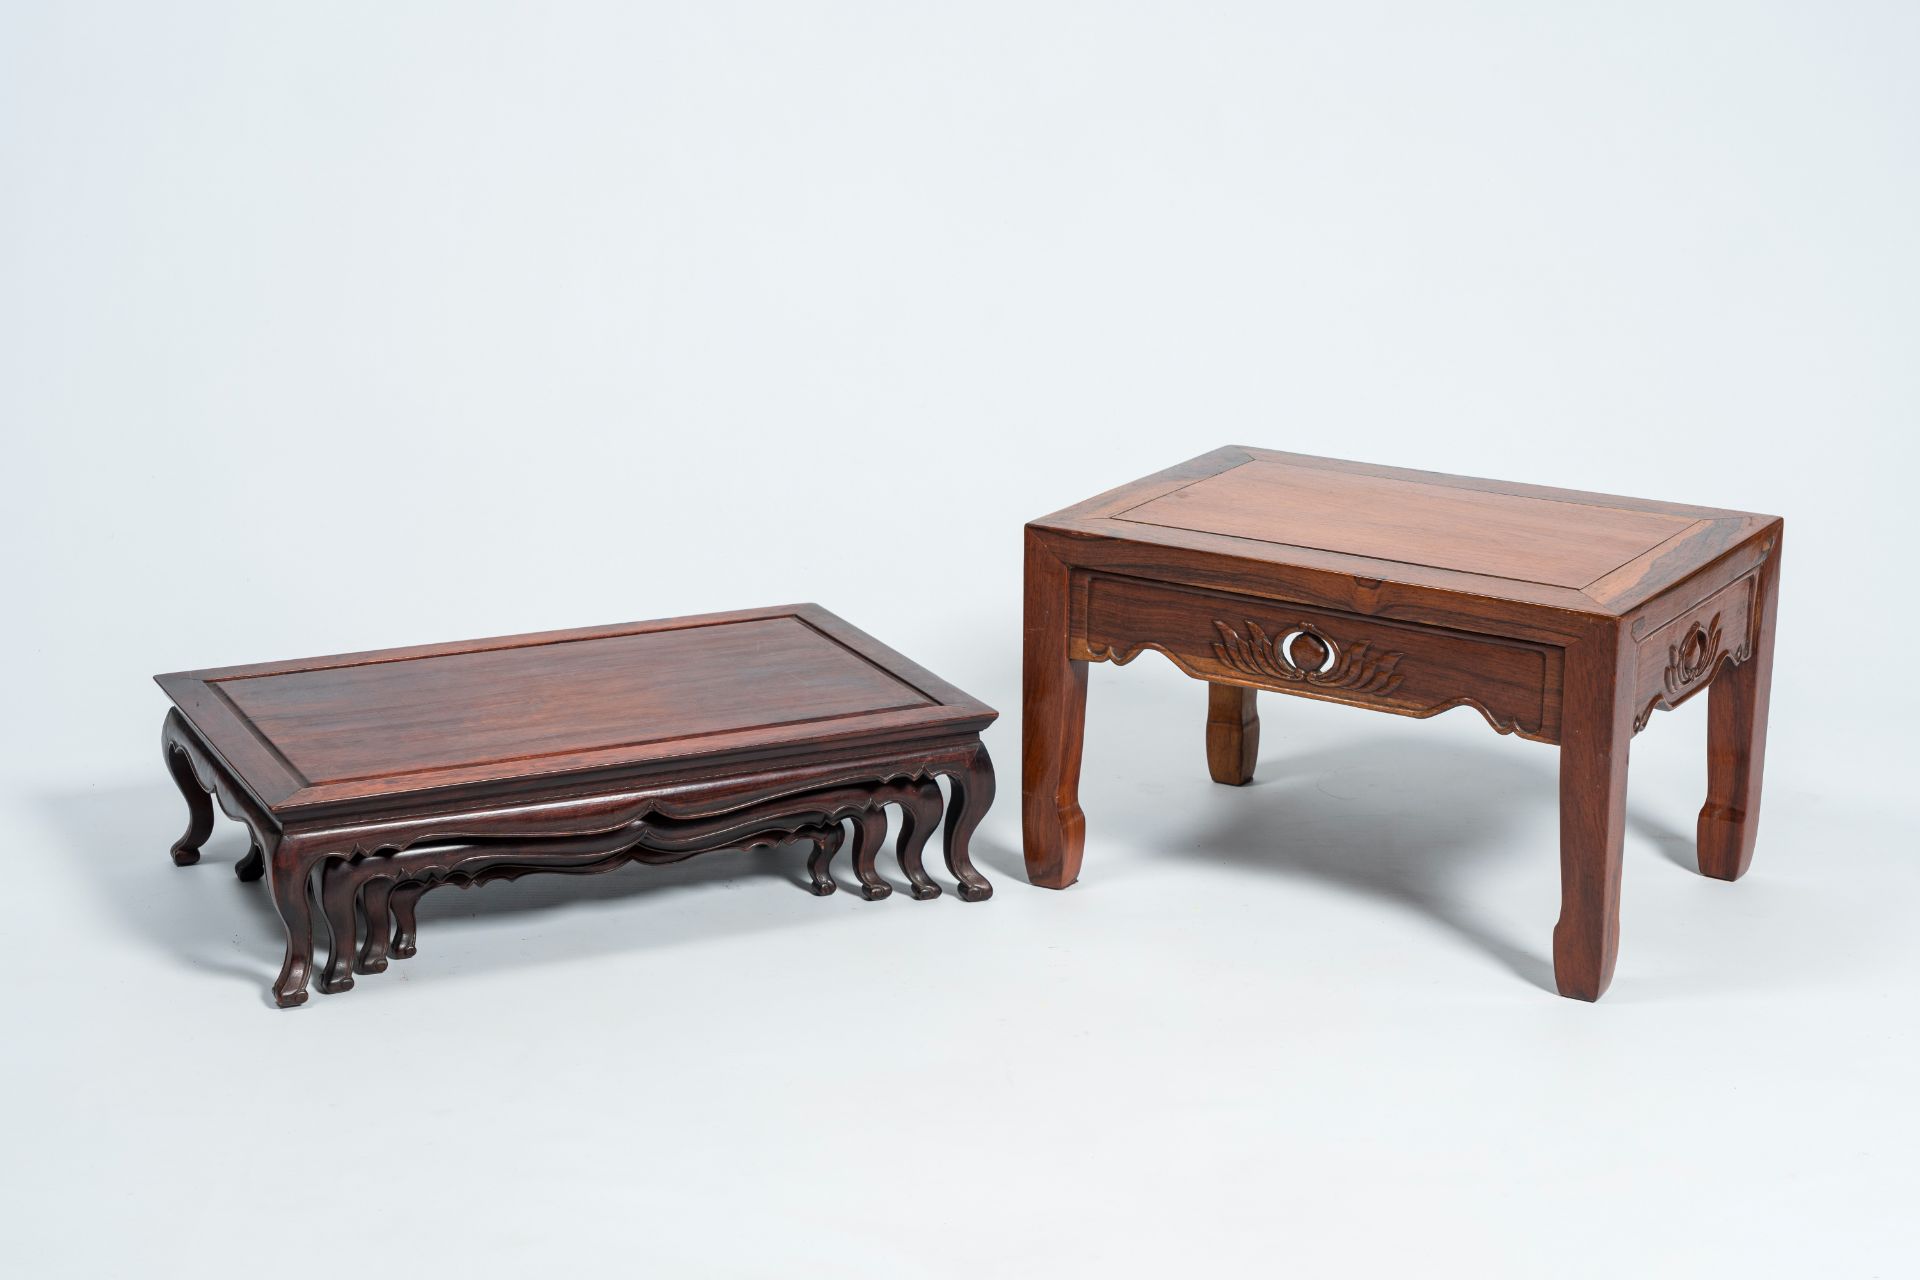 Four Chinese rectangular wood nesting tables and a side table with floral design, 20th C. - Image 2 of 8